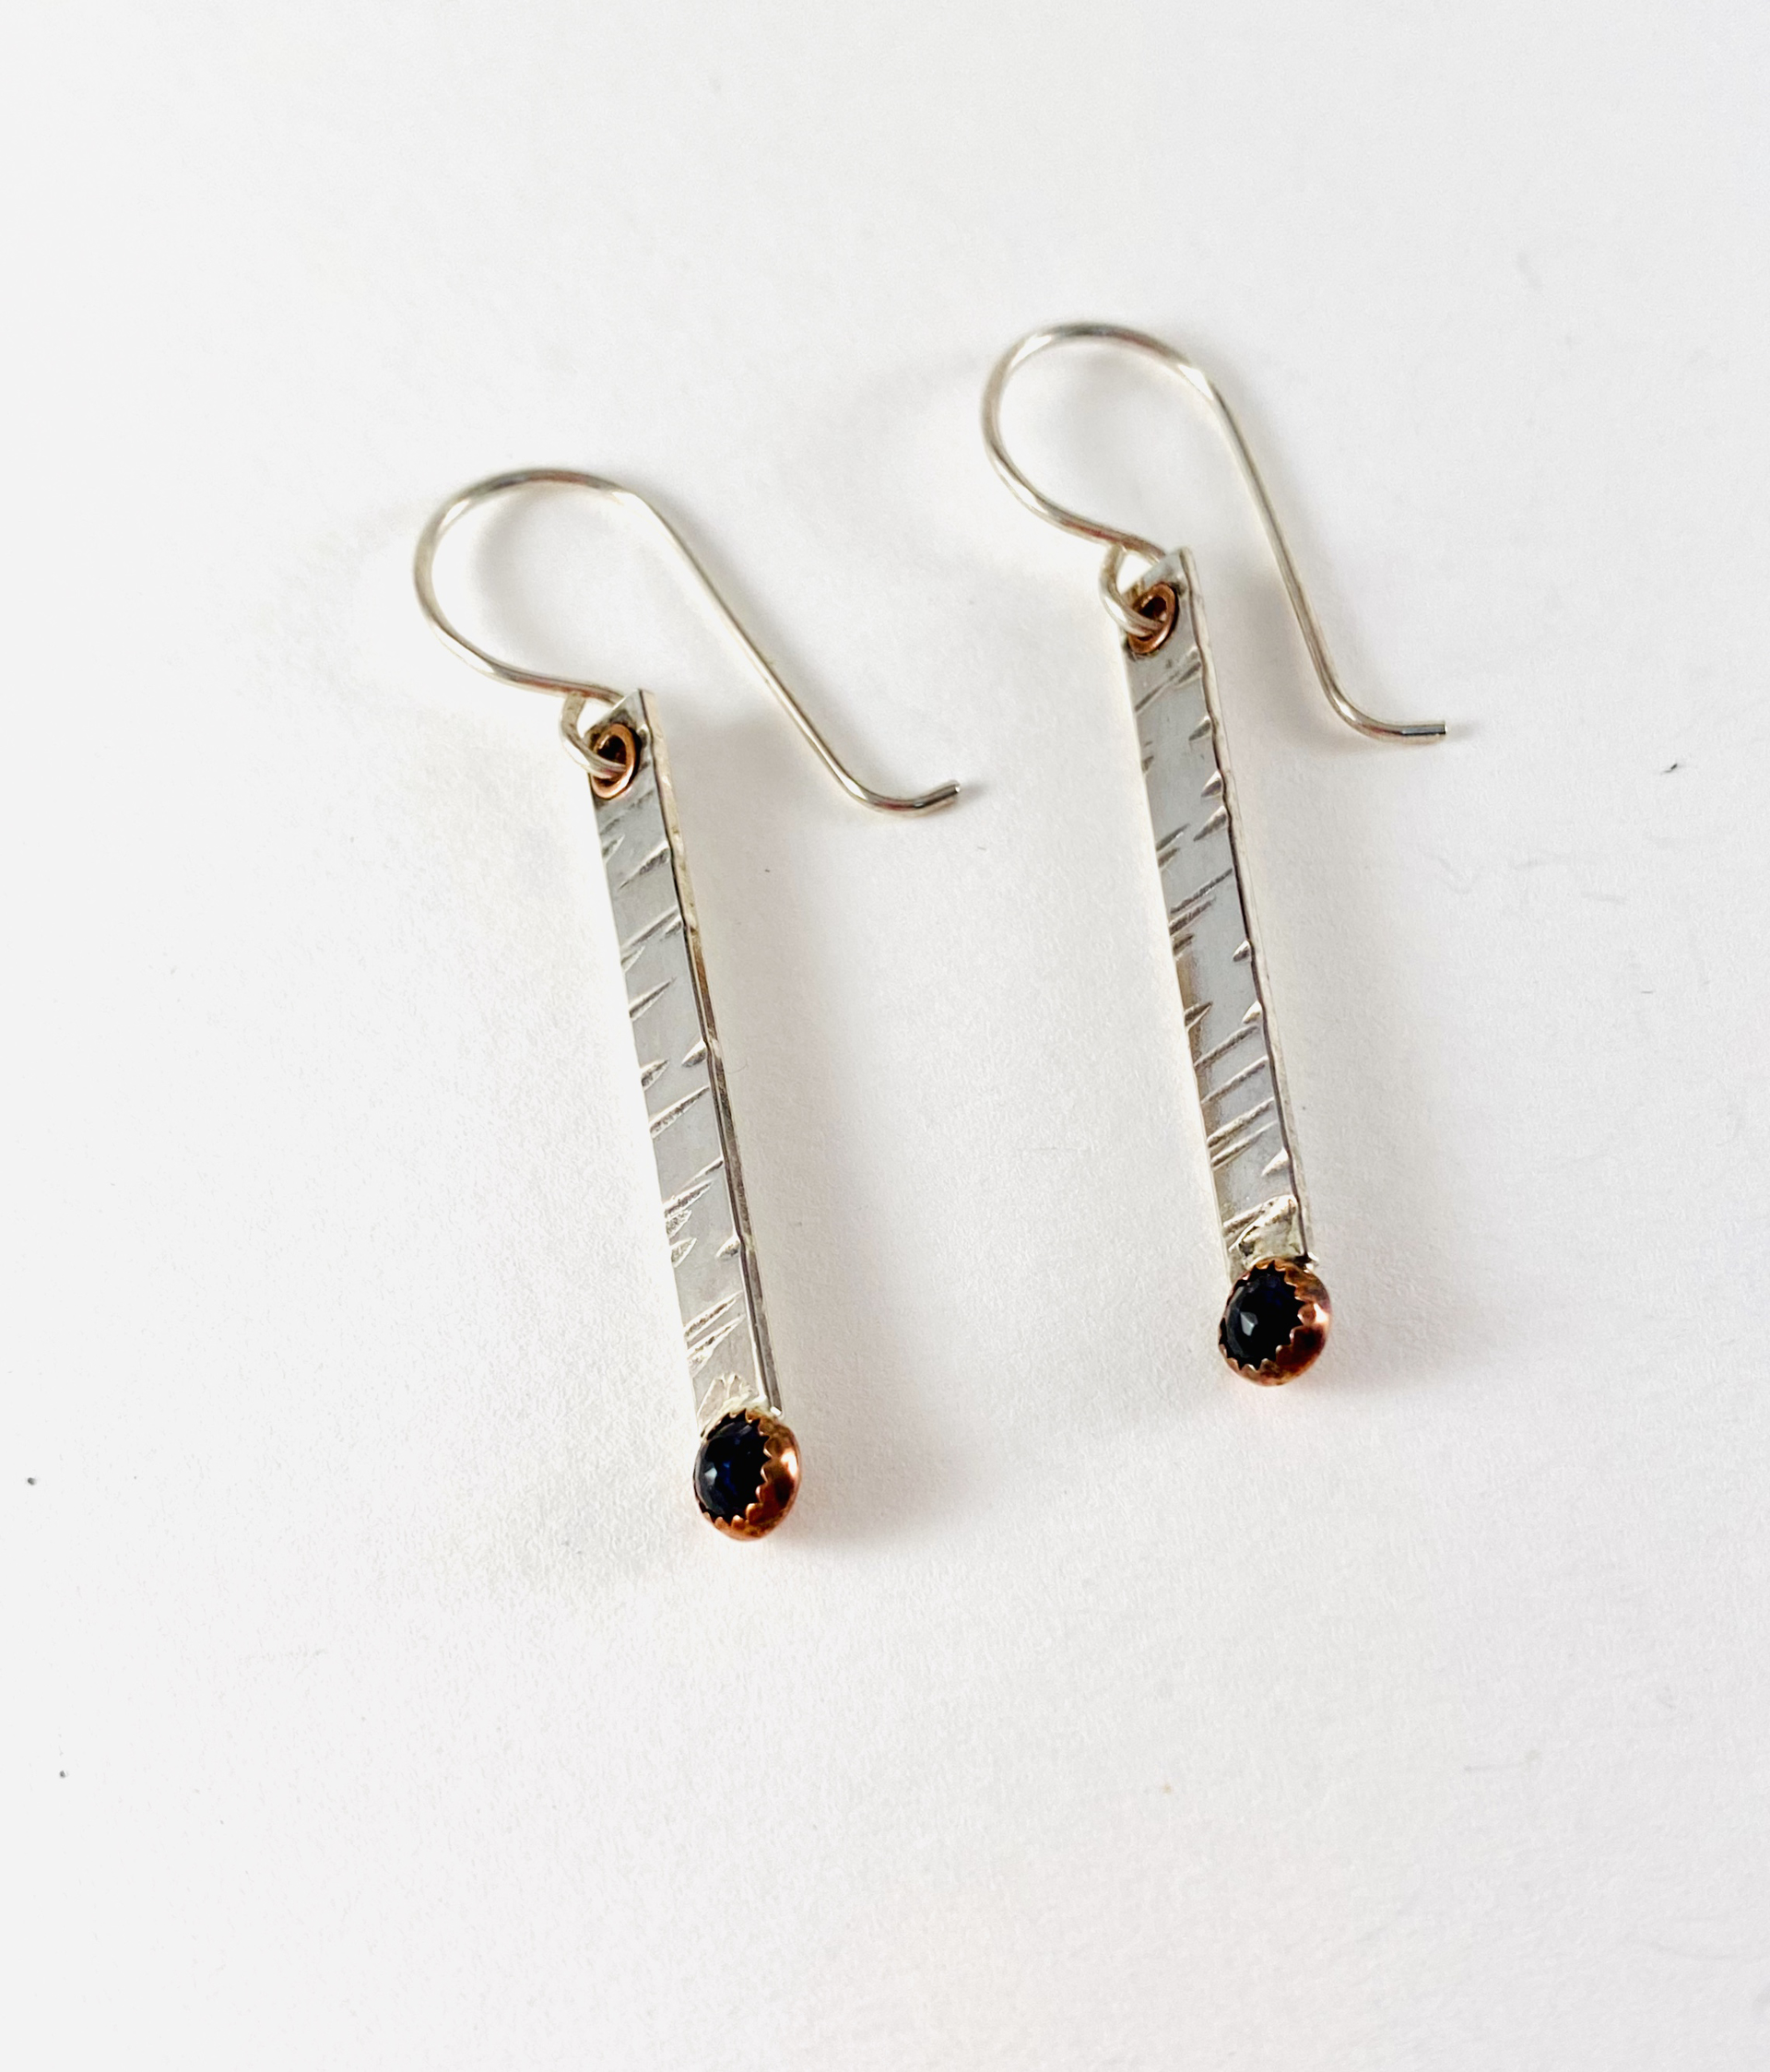 Silver Birch Earrings, Iolite and Copper accent #15 by Shelby Lee - jewelry